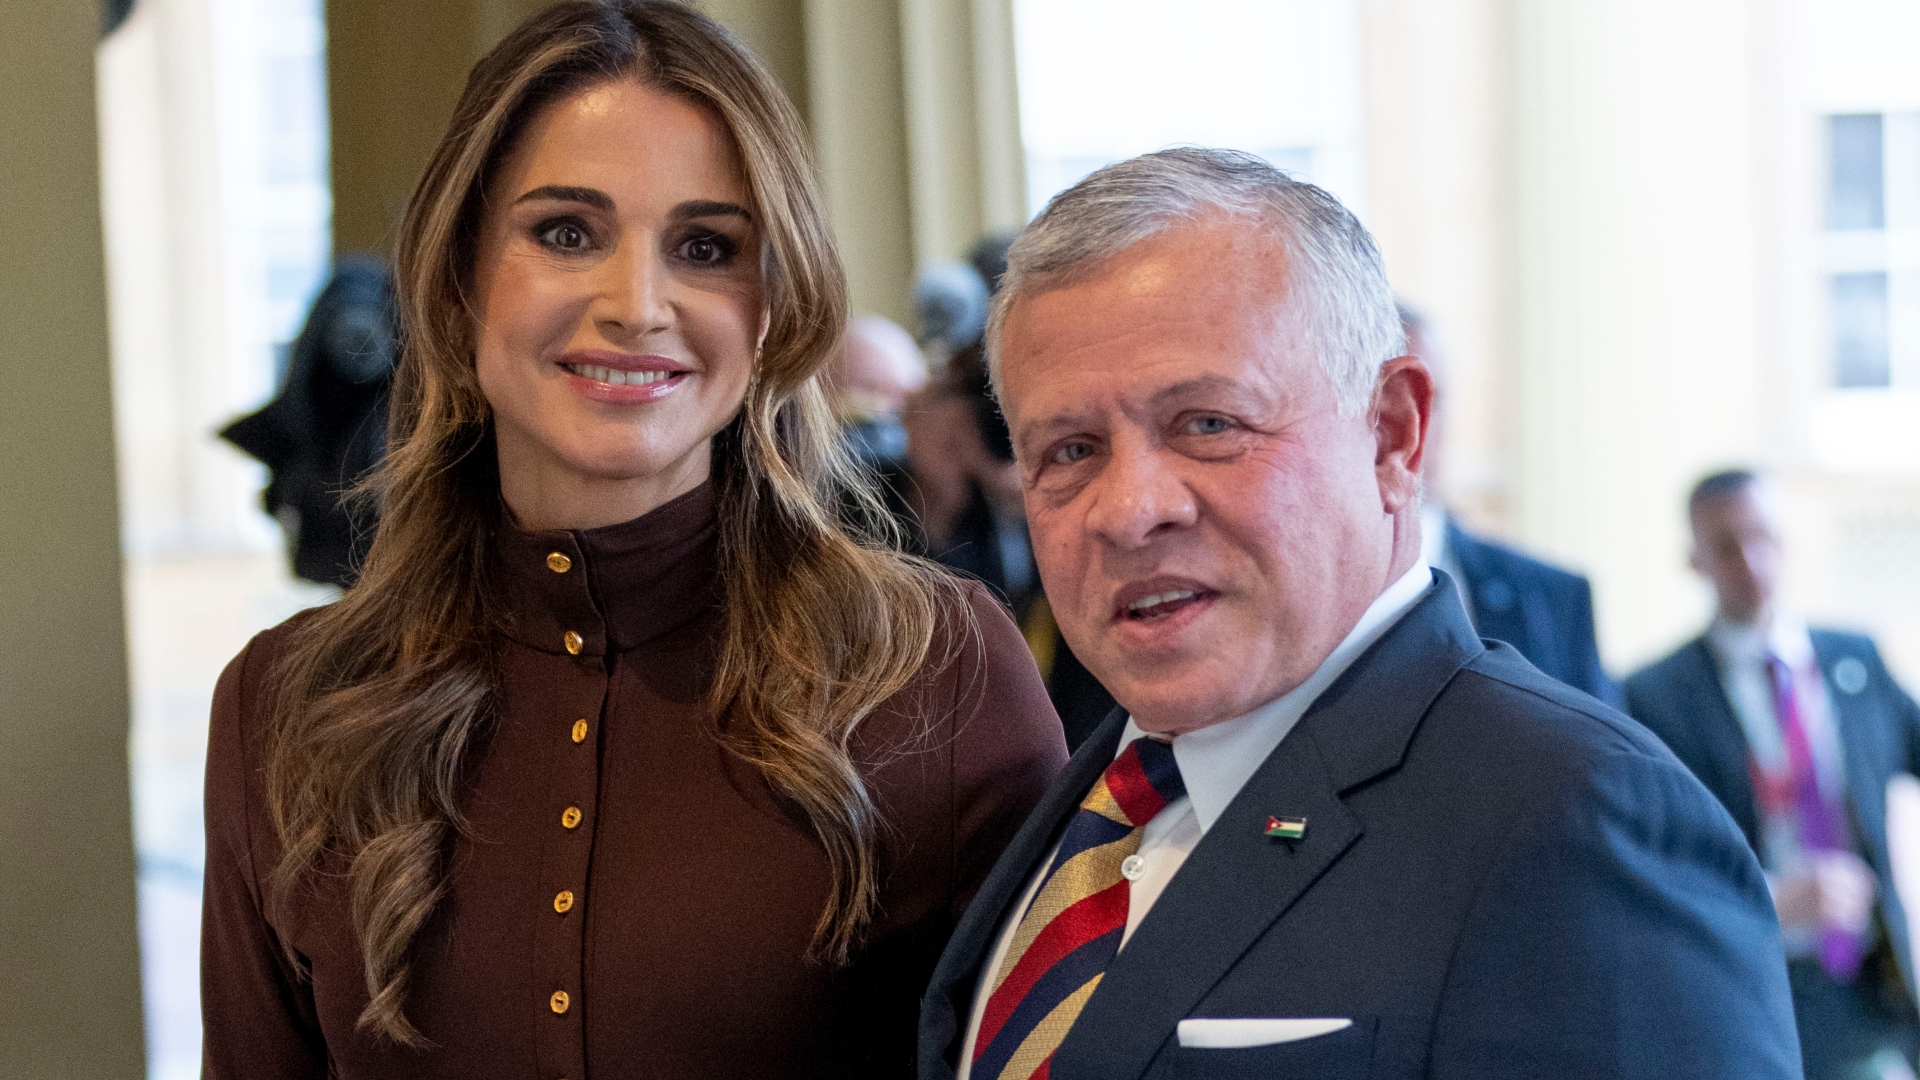 King Abdullah II of Jordan and Queen Rania of Jordan attend the Coronation Reception For Overseas Guests at Buckingham Palace on May 5, 2023 in London, England.